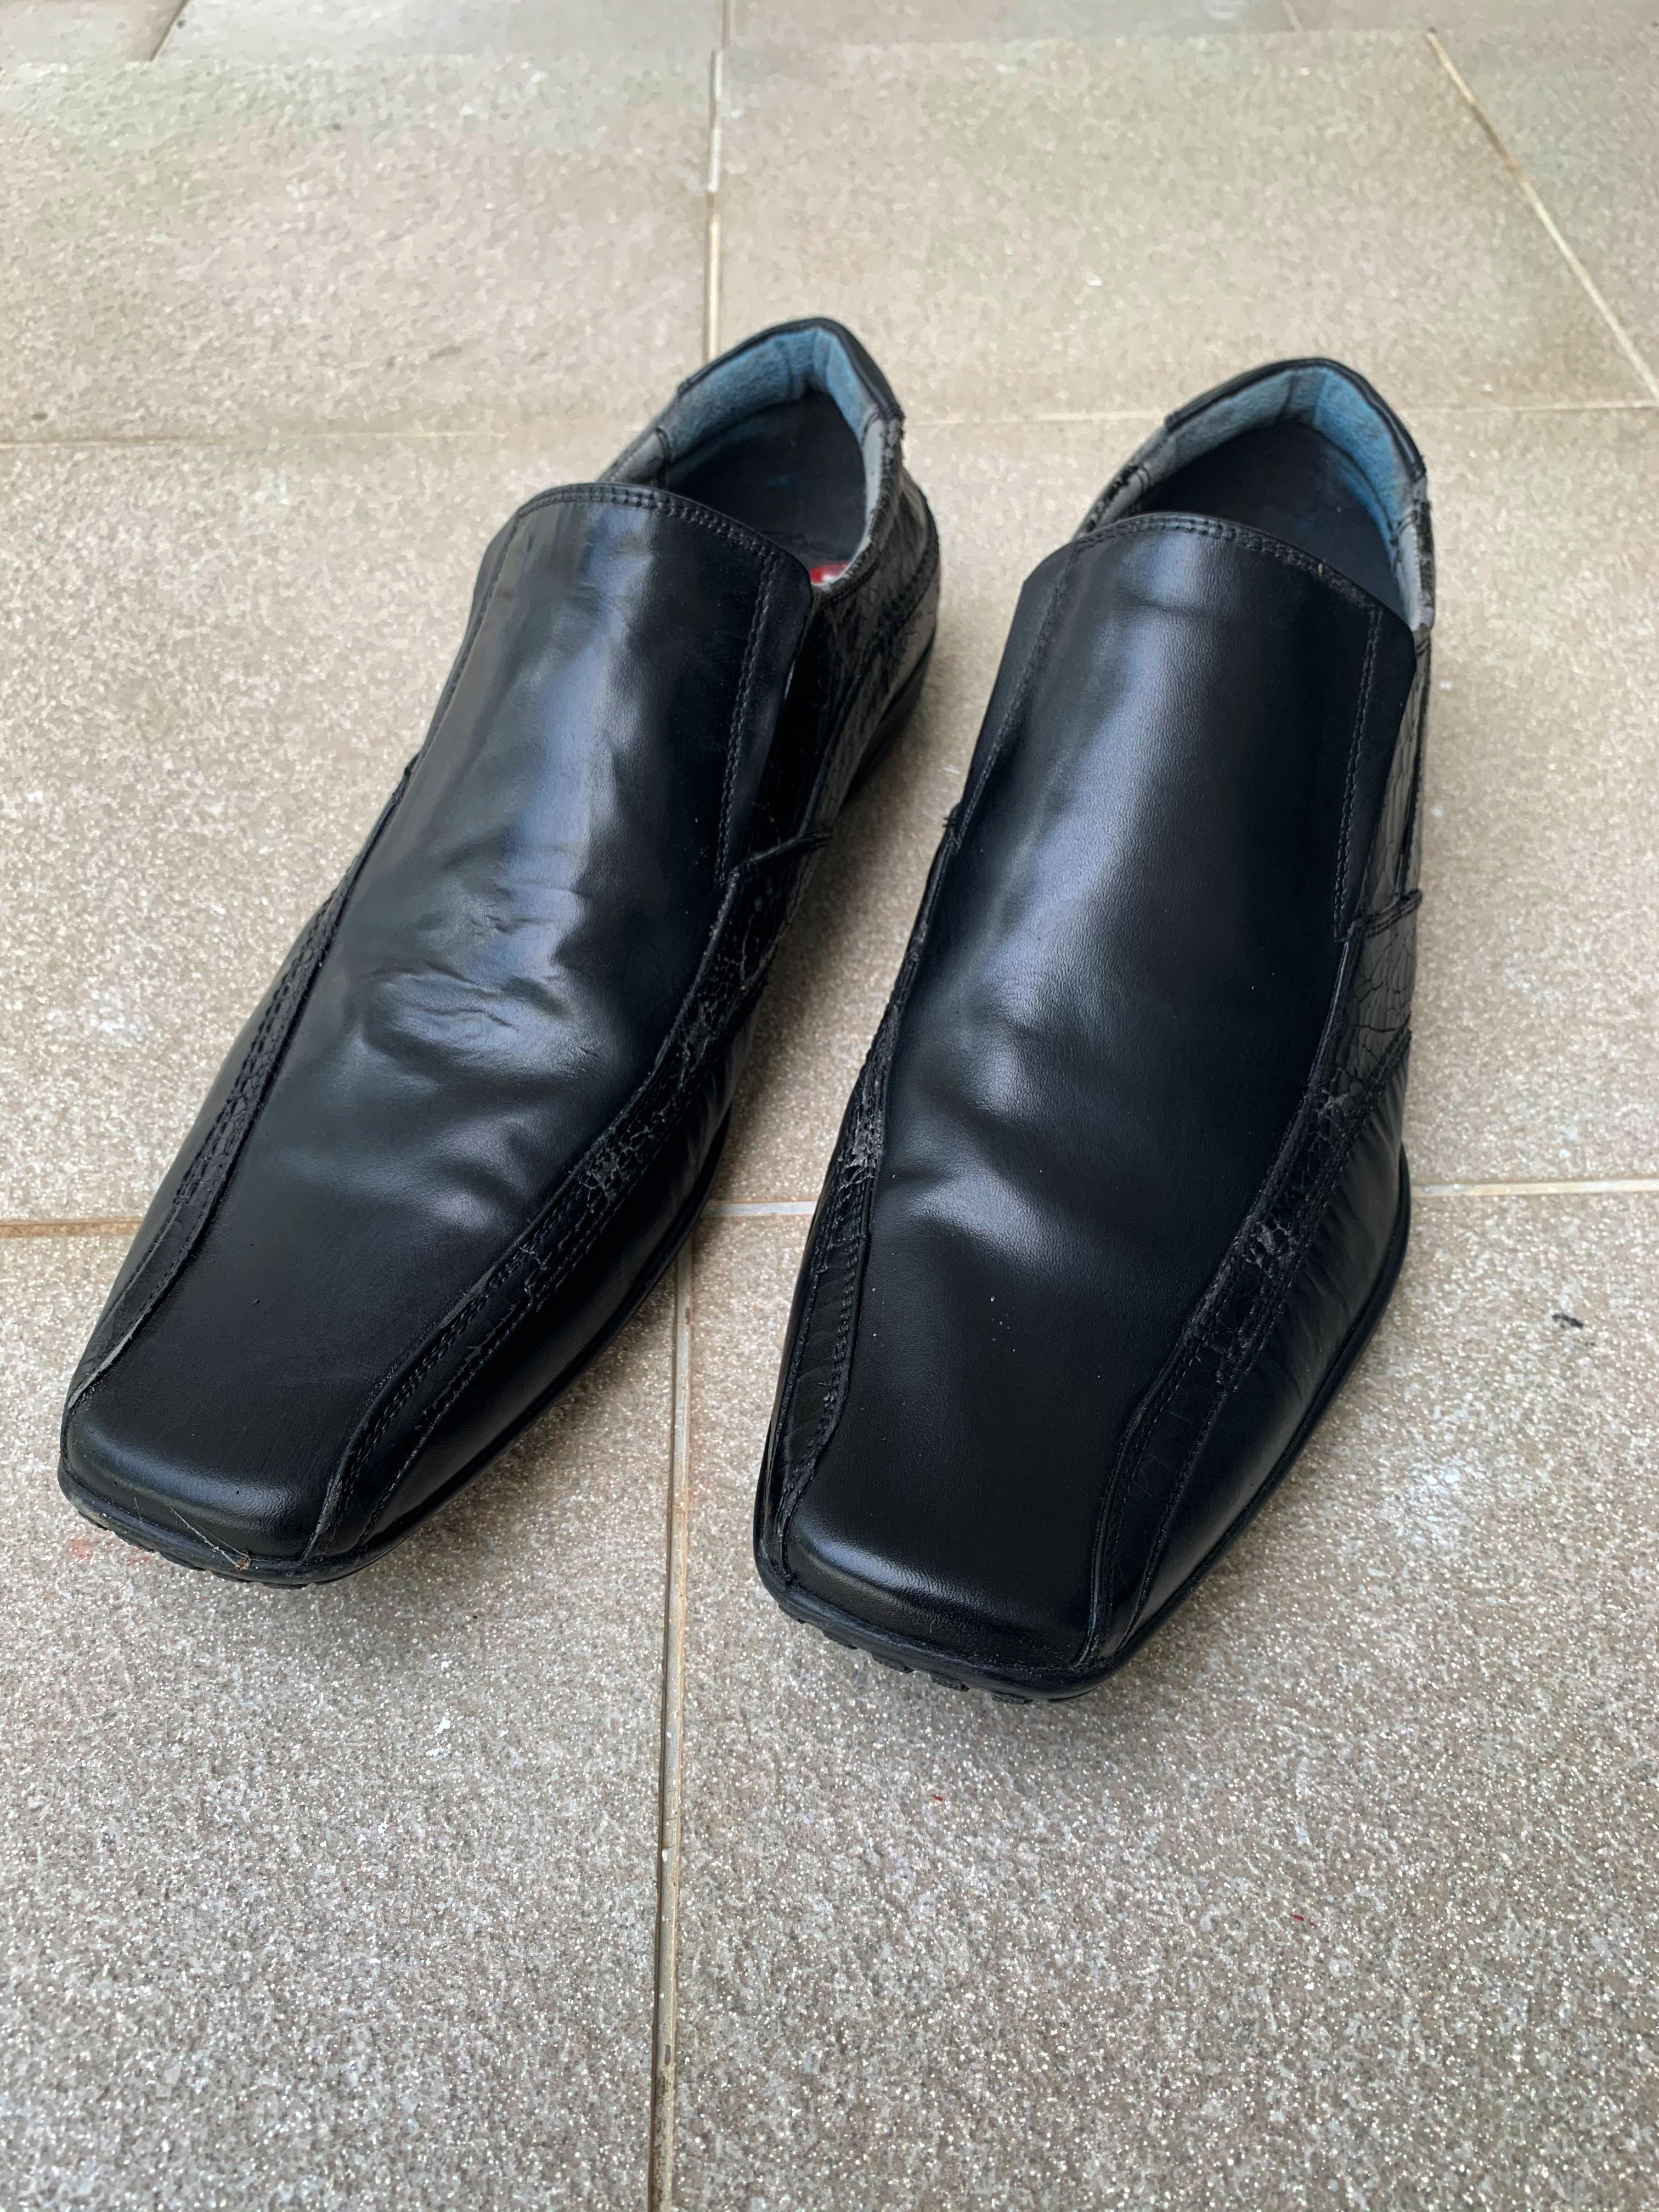 leather shoes on sale